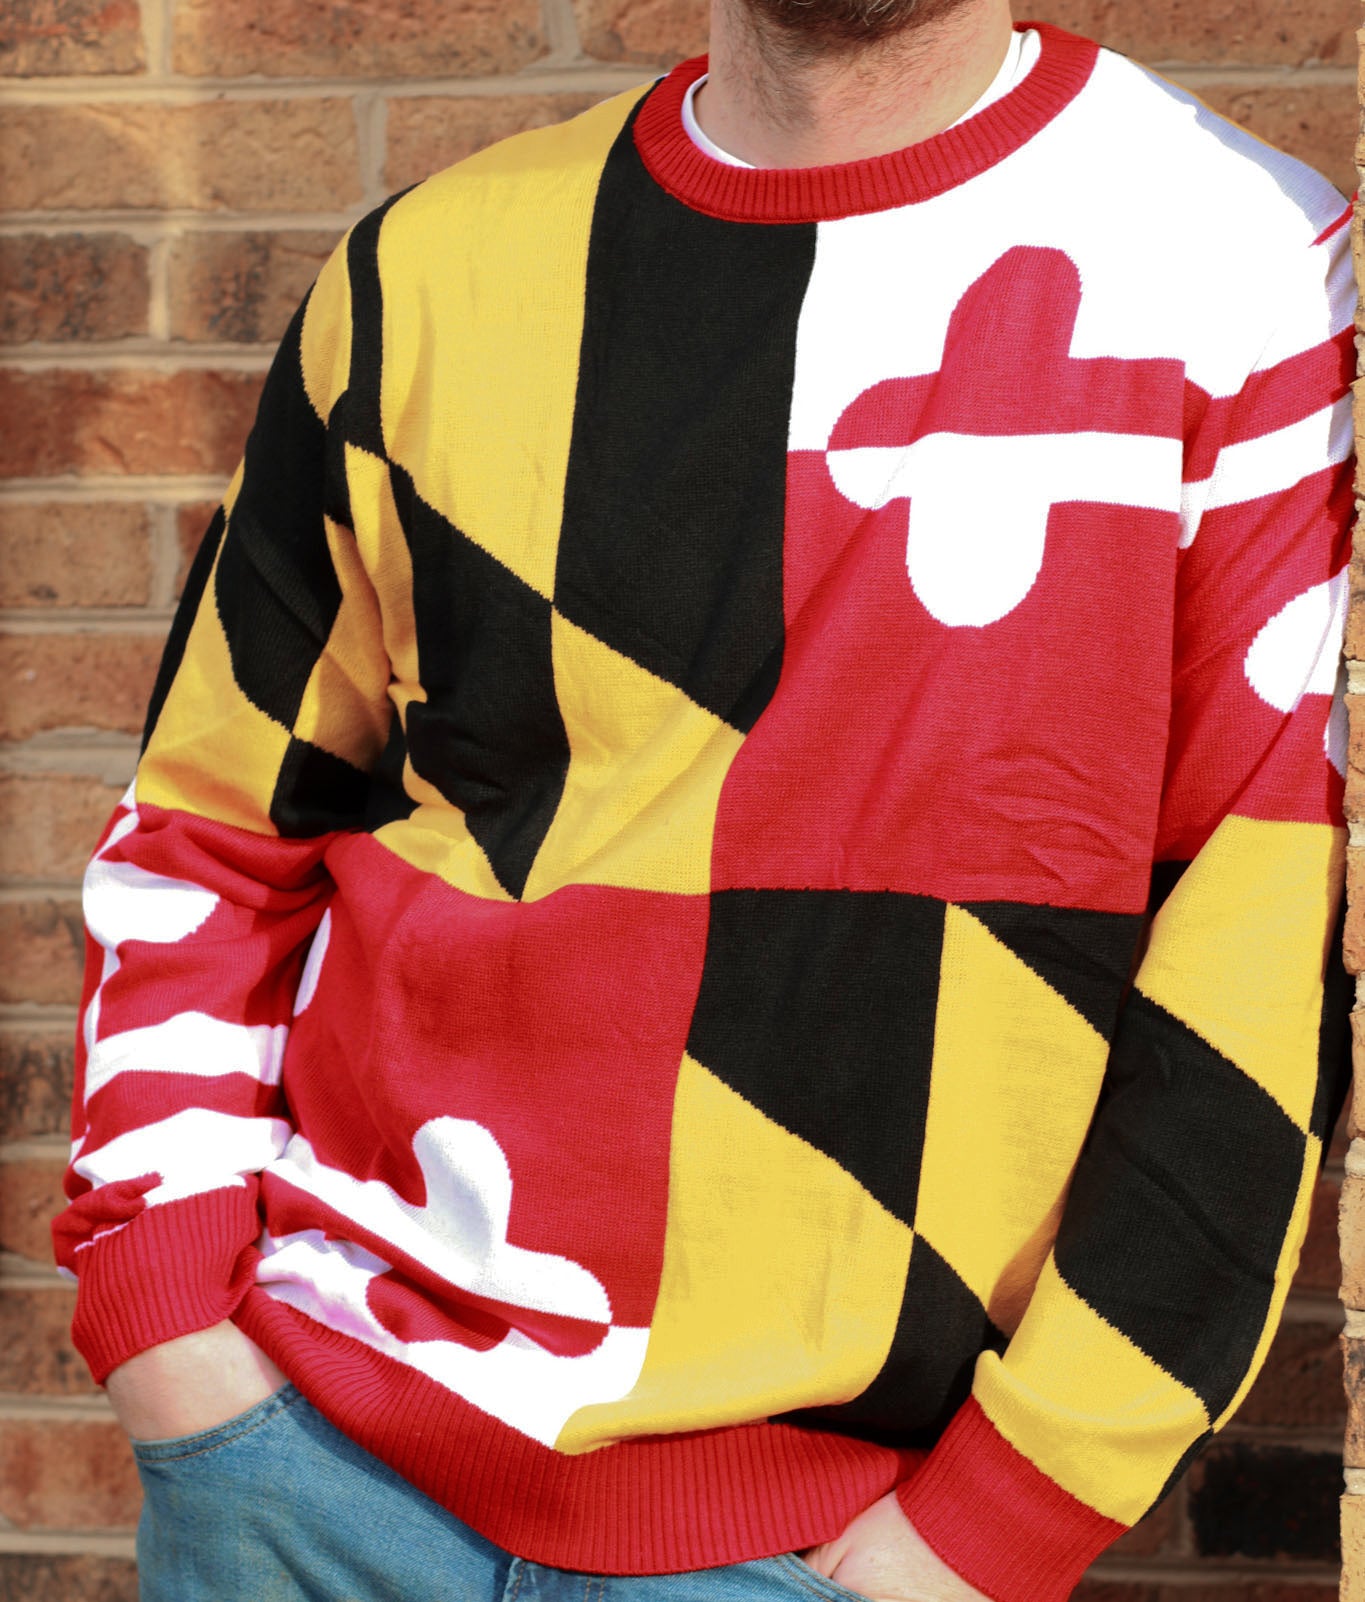 BALTIMORE & MARYLAND SWEATERS